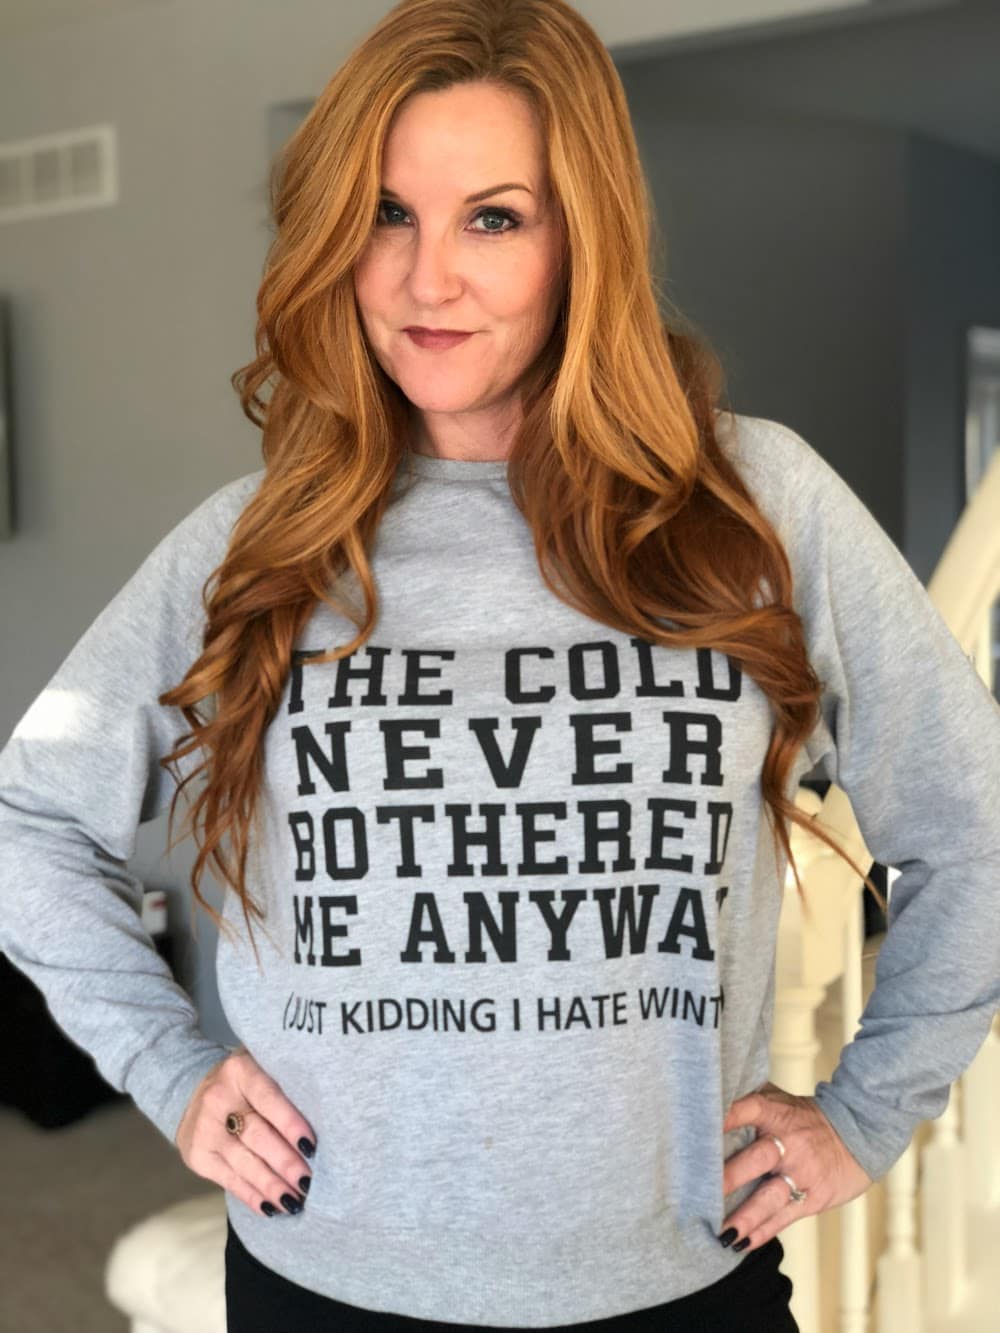 Go Graphic - Why I Love Shirts With a Message - Cold Never Bothered Me Anyway Hate Winter